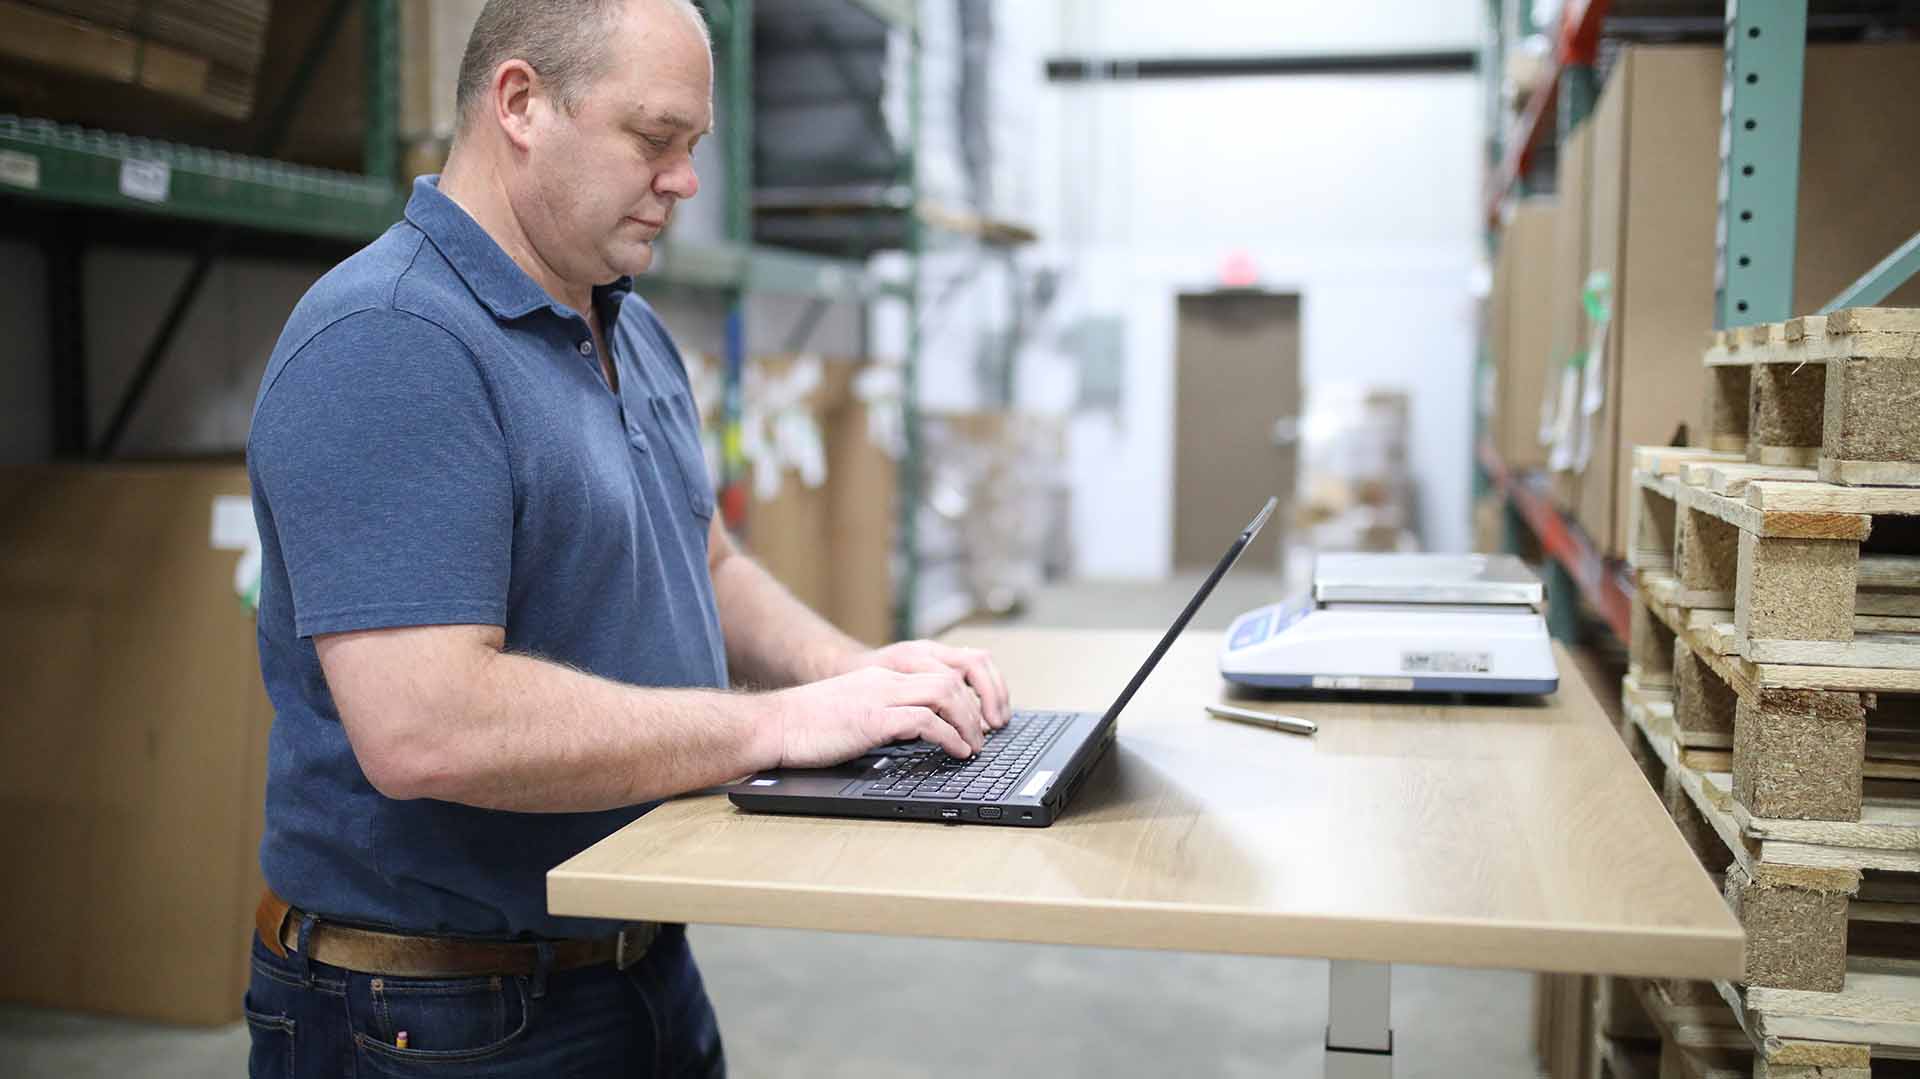 A warehouse worker using a laptop to view order fulfillment information